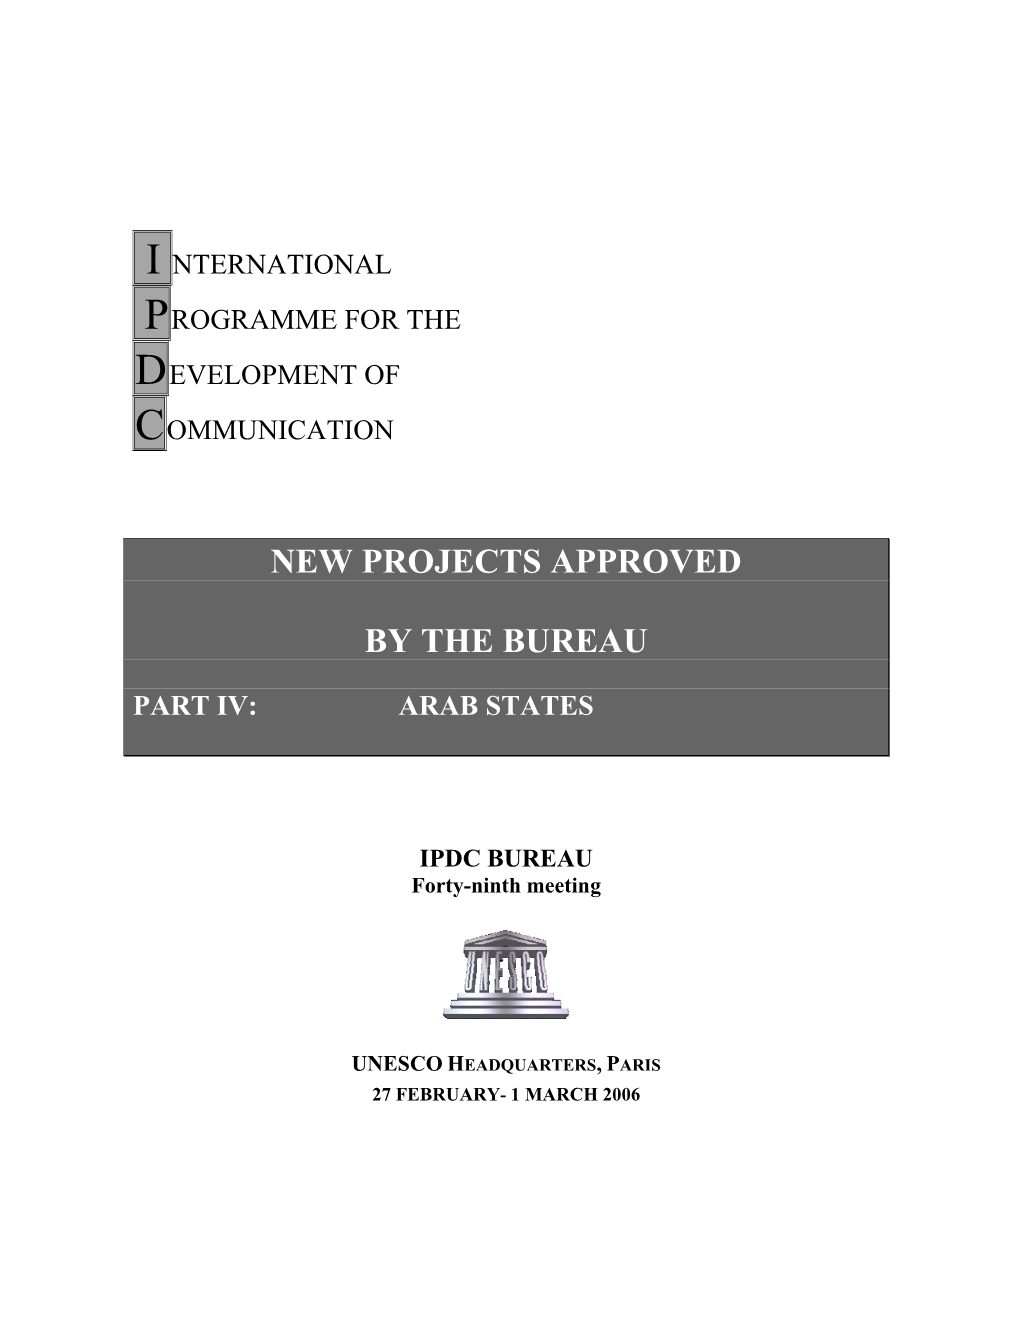 New Projects Approved by the Bureau